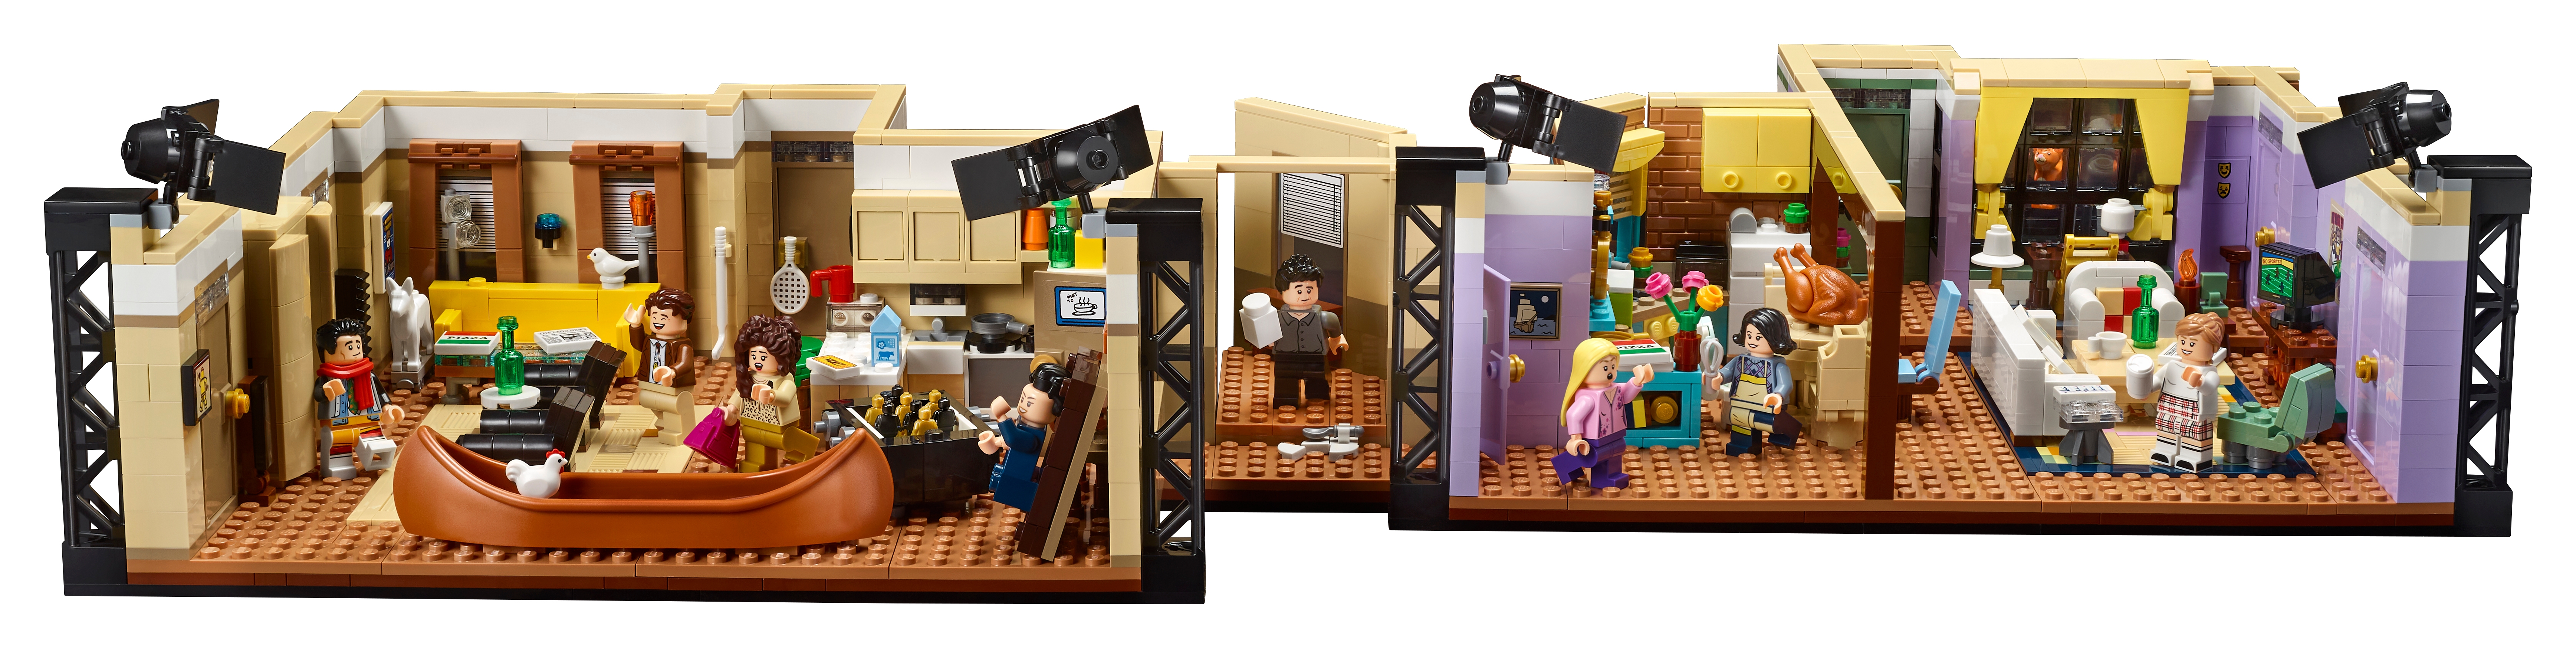 LEGO Set 10292-1 Friends - The Apartments (2021 Icons)